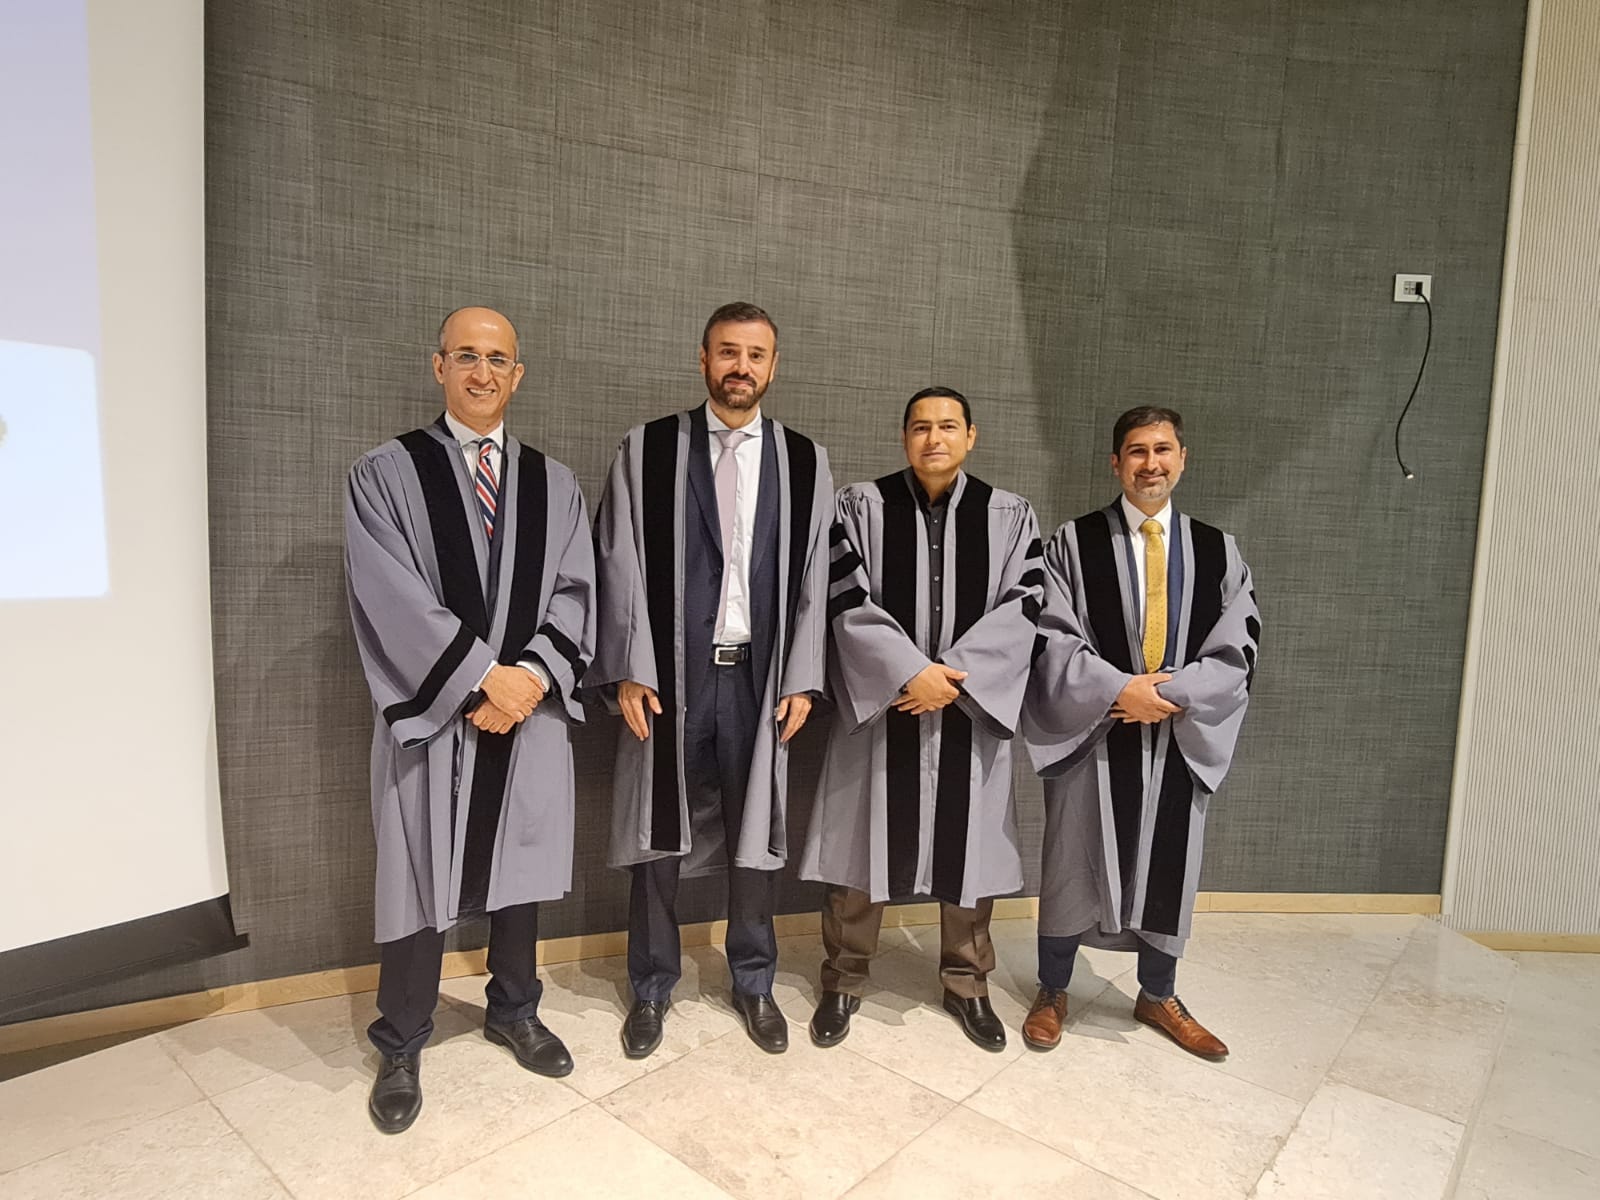 The First Graduates from the Master in Data Sciences and Business Analytics Defend their Thesis